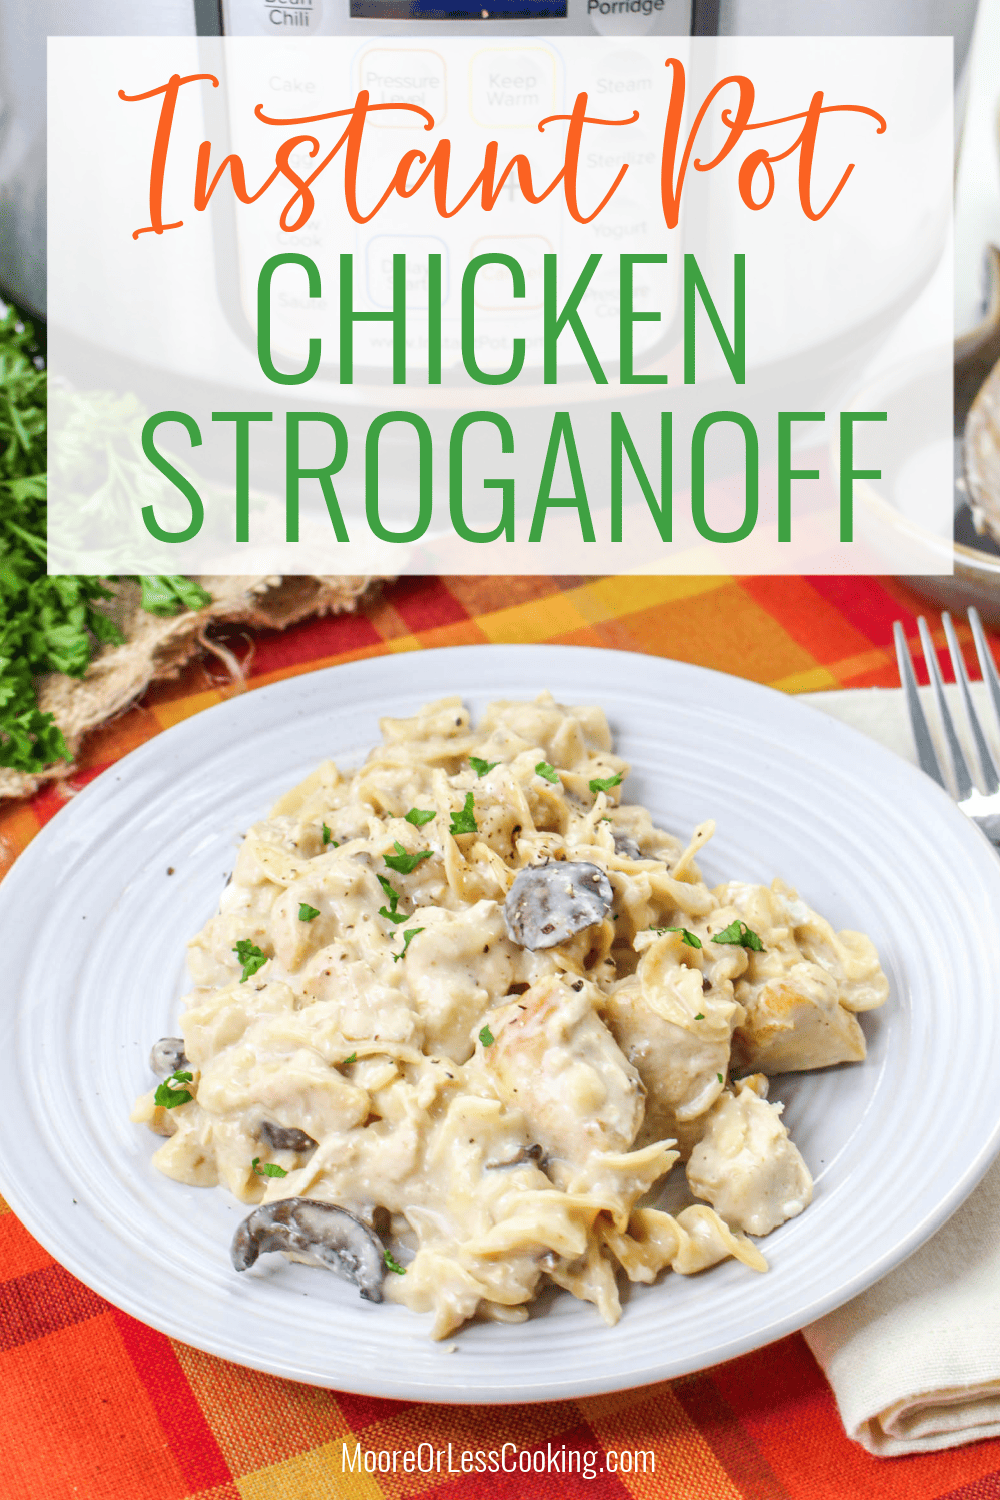 If you're looking for the ultimate quick and easy dinner, this Instant Pot Chicken Stroganoff recipe is it! Egg noodles are cooked and smothered with a flavor-packed mushroom and onion sauce along with tender bite-sized chicken before being tossed with a creamy sour cream mixture. It's a one-pot meal that's always a family favorite. via @Mooreorlesscook